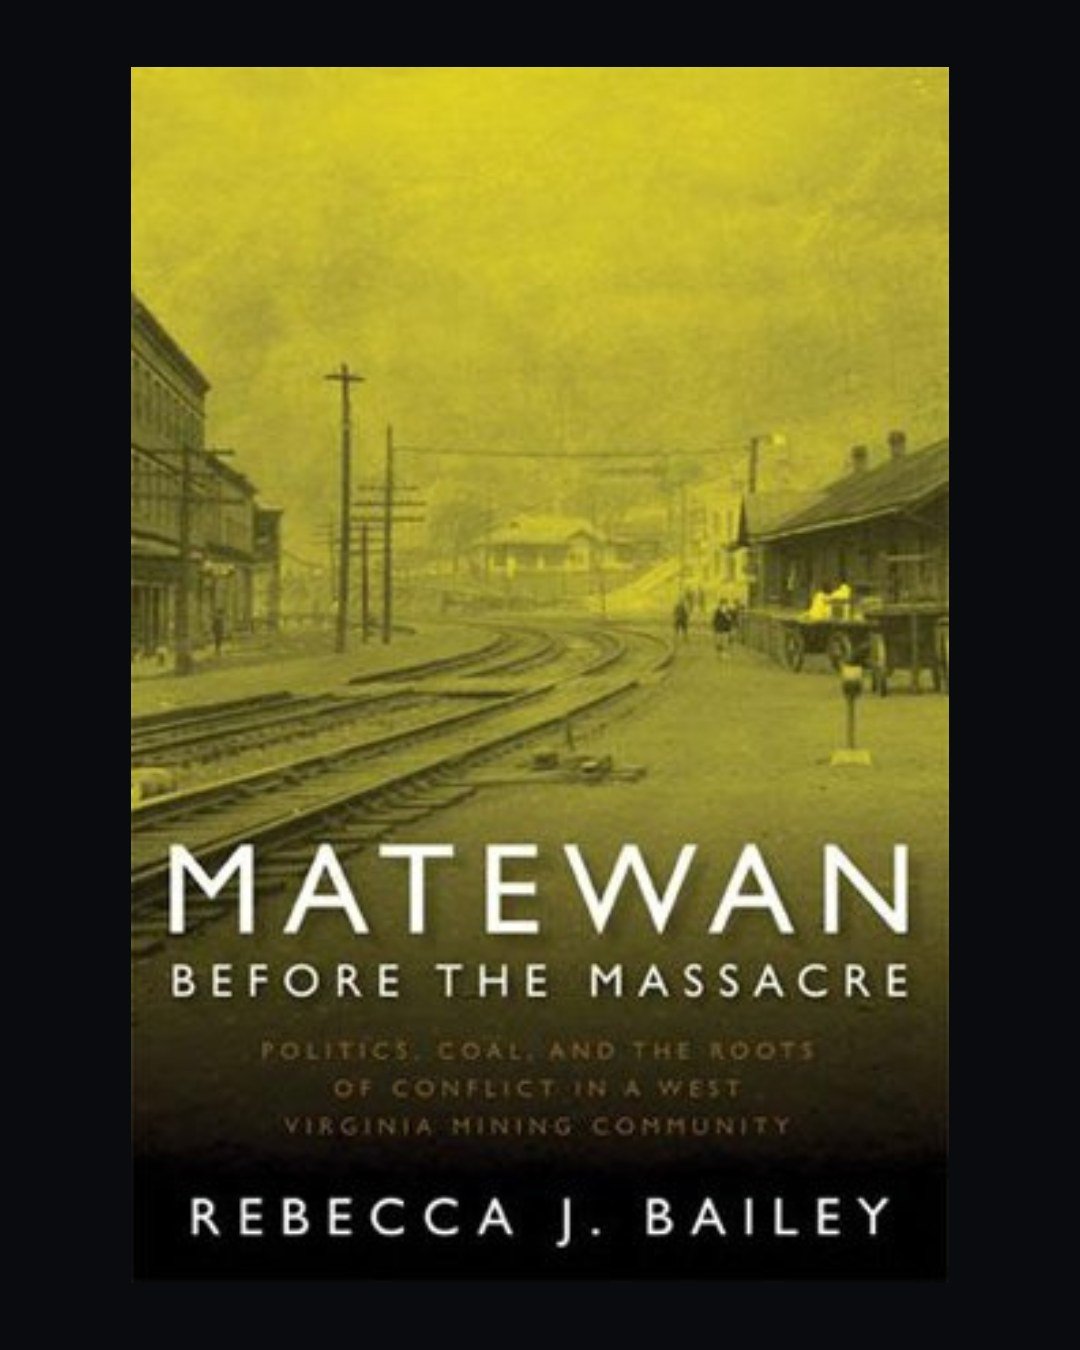 ‼️ Featured Book 📖

We've been privileged to get a chance to work with Becky Bailey and her students at NKU over the last few months, including a visit back to Matewan! Dr. Bailey was the oral historian for the original Matewan Oral History Project,